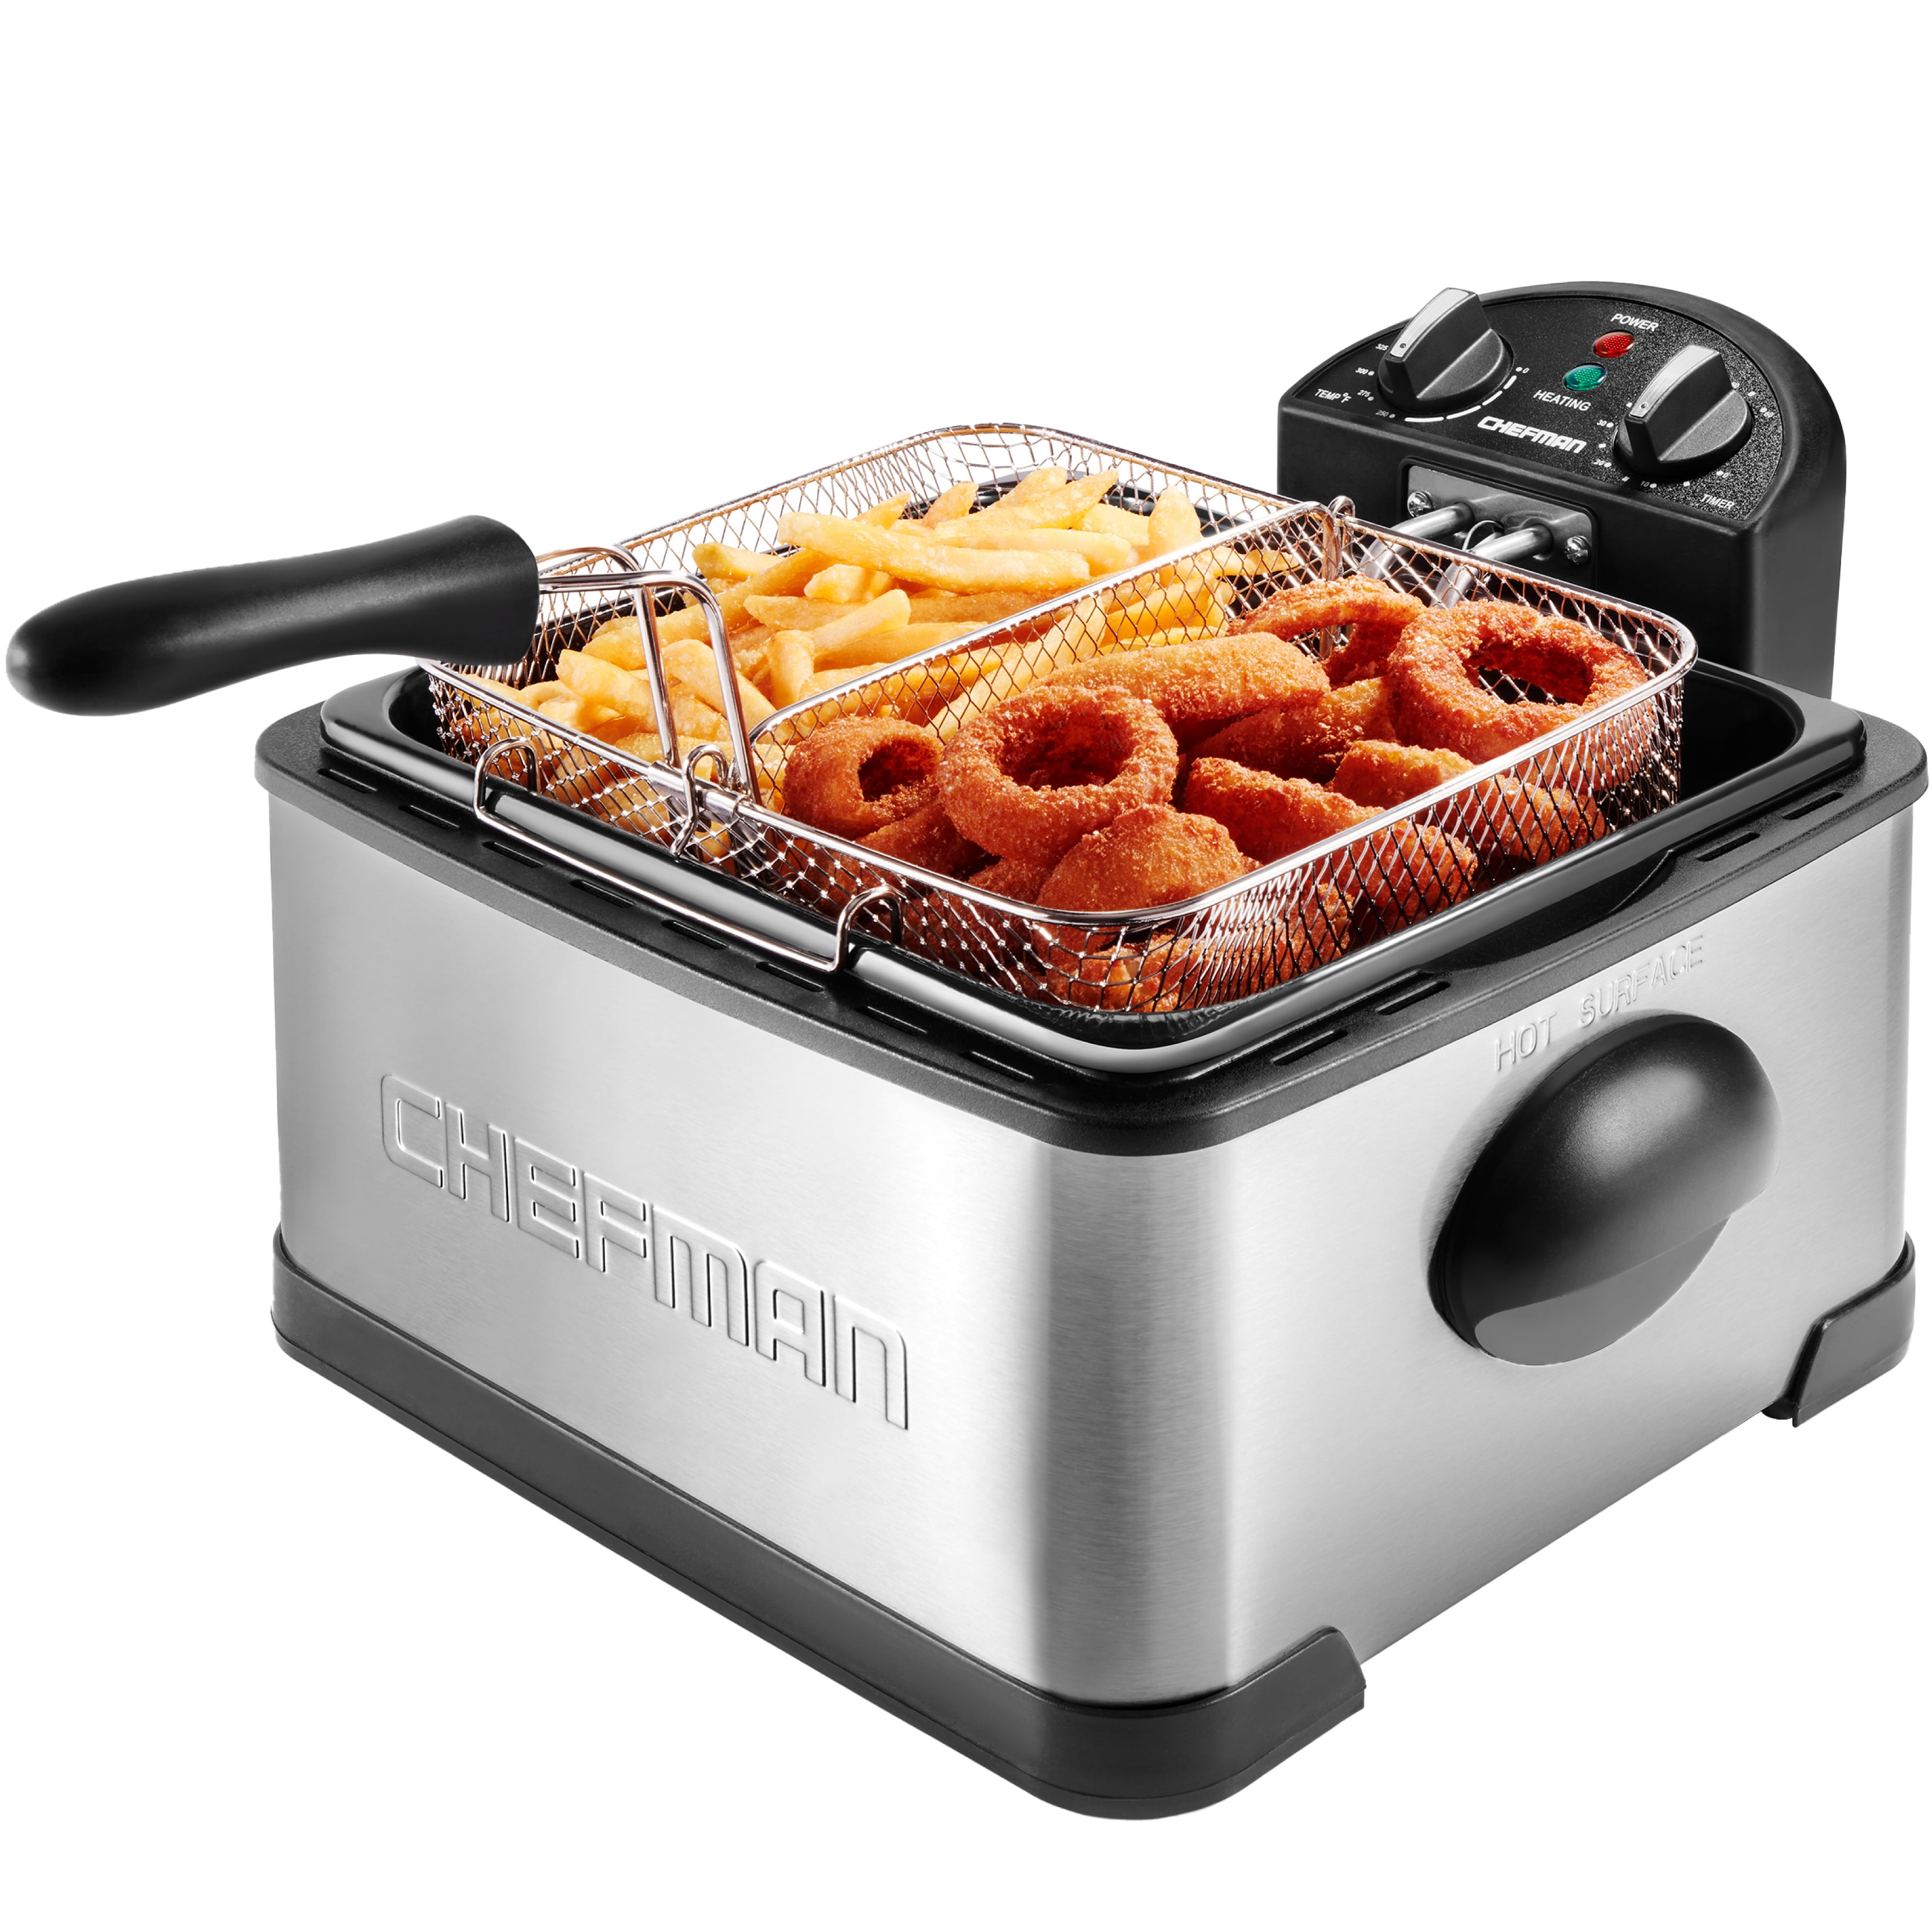 Chefman Fry Guy, The Most Compact & Convenient To Deep Fry Comfort Food,  Restaurant-Style Basket With A 1.6-Quart Capacity, Easy-View Window 